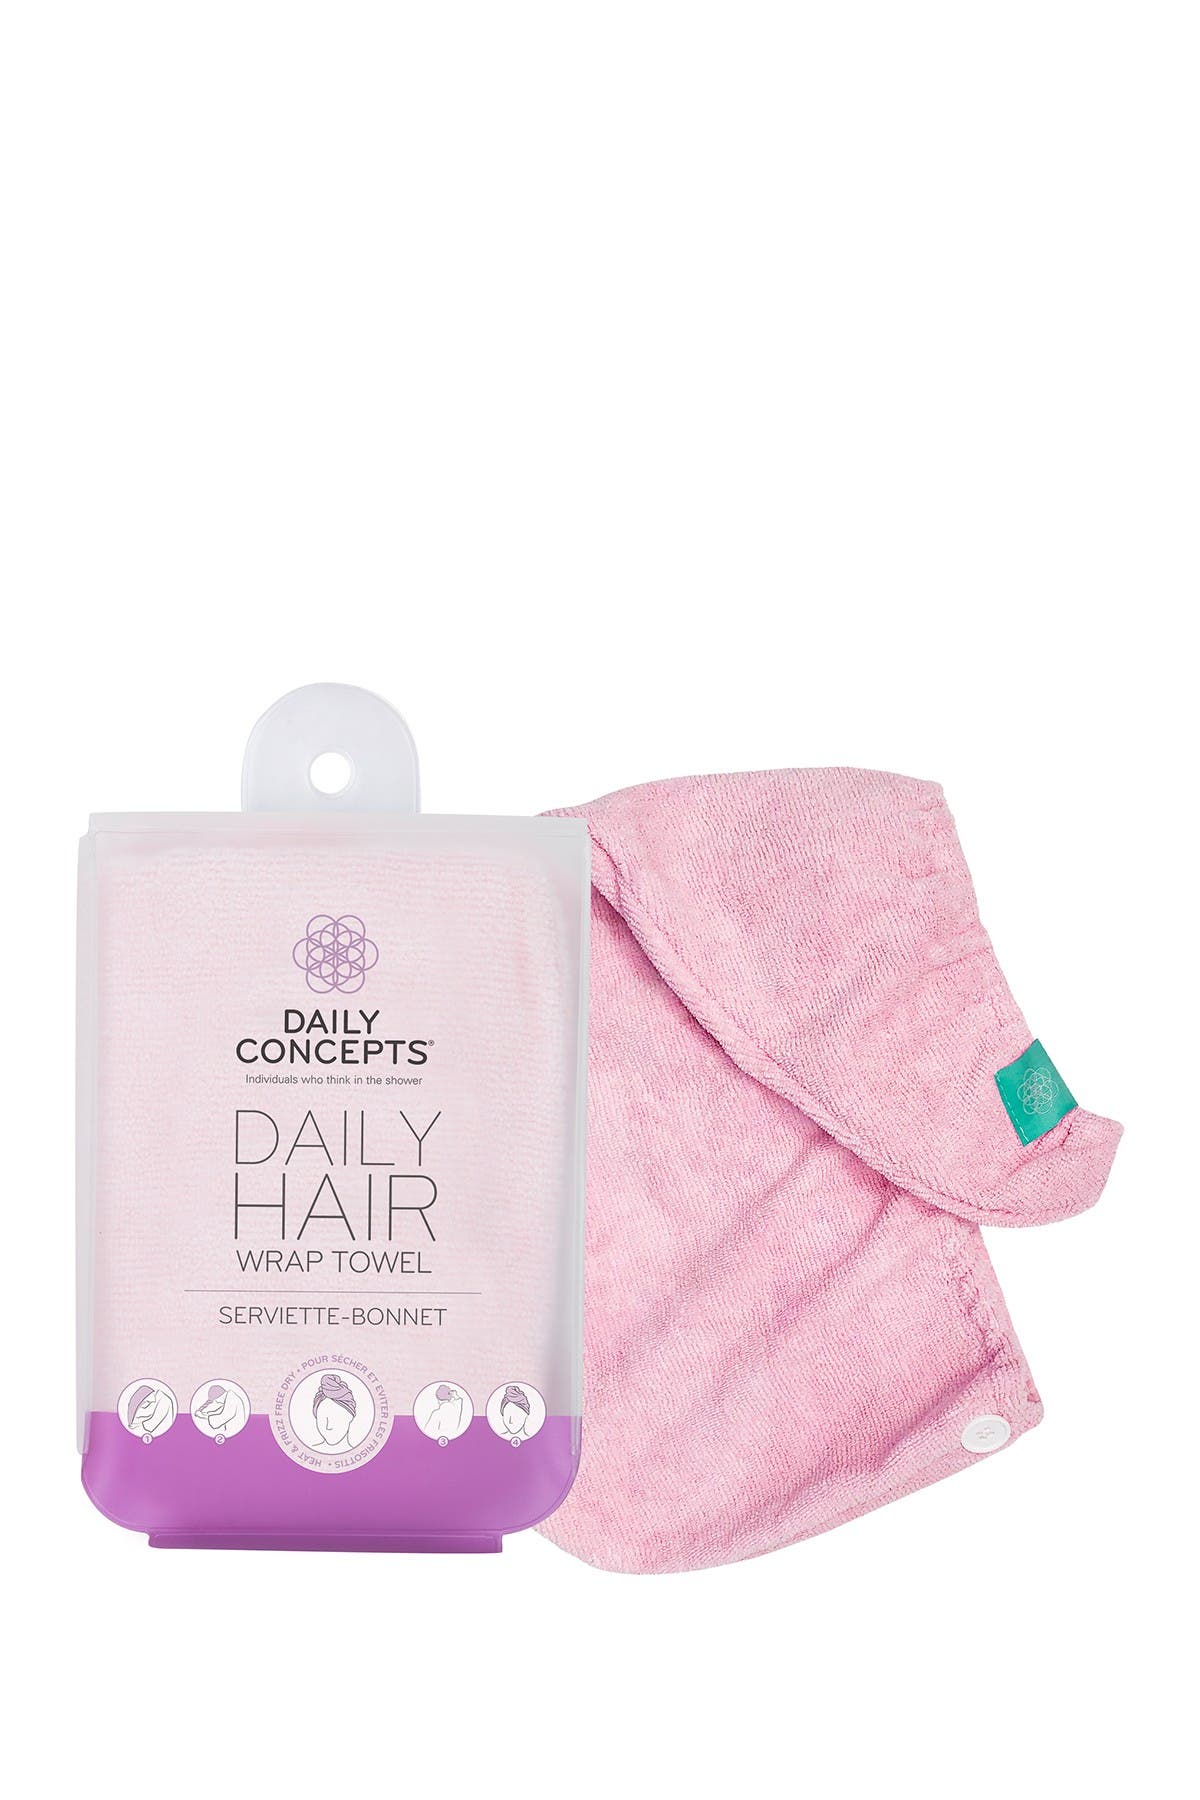 Daily Concepts Daily Hair Towel Wrap In Pink